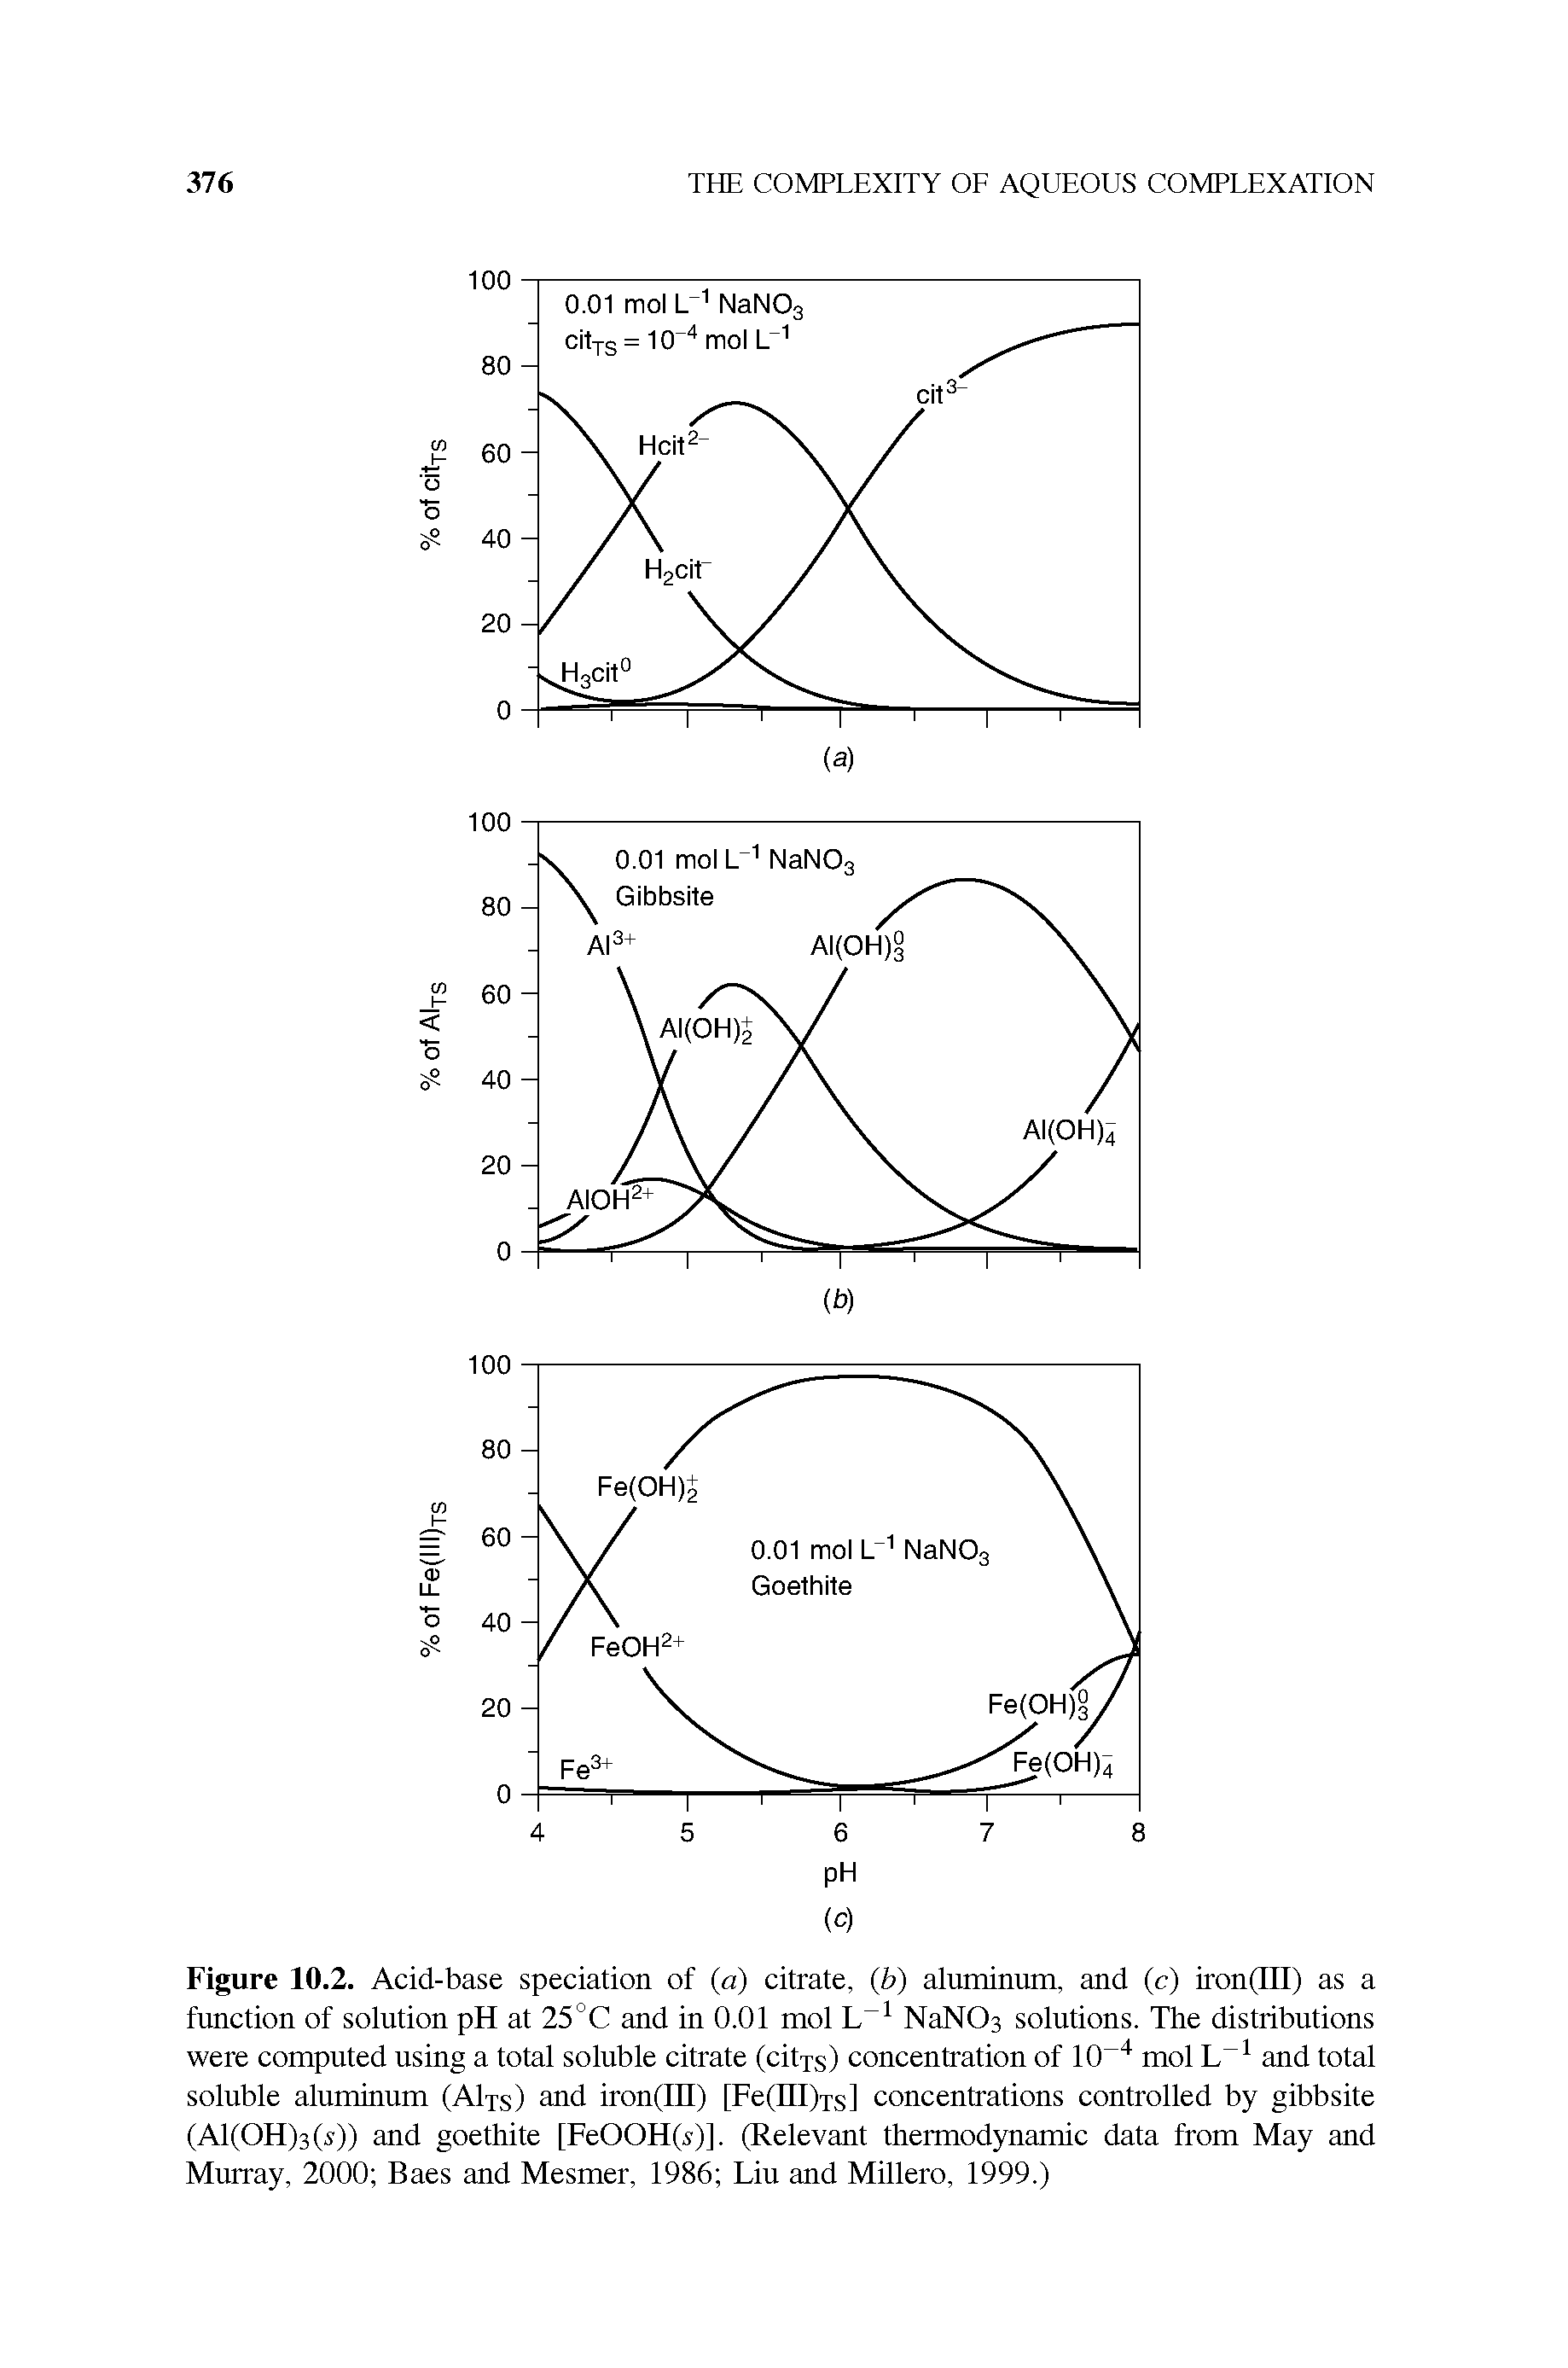 Figure 10.2. Acid-base speciation of (a) citrate, (b) aluminum, and (c) iron(III) as a function of solution pH at 25°C and in 0.01 mol L NaNOs solutions. The distributions were computed using a total soluble citrate (citys) concentration of 10 mol and total soluble aluminum (Aljs) and iron(in) [Fe(ni)Ts] concentrations controlled by gibbsite (A1(OH)3(x)) and goethite [FeOOH(x)]. (Relevant thermodynamic data from May and Murray, 2000 Baes and Mesmer, 1986 Liu and Millero, 1999.)...